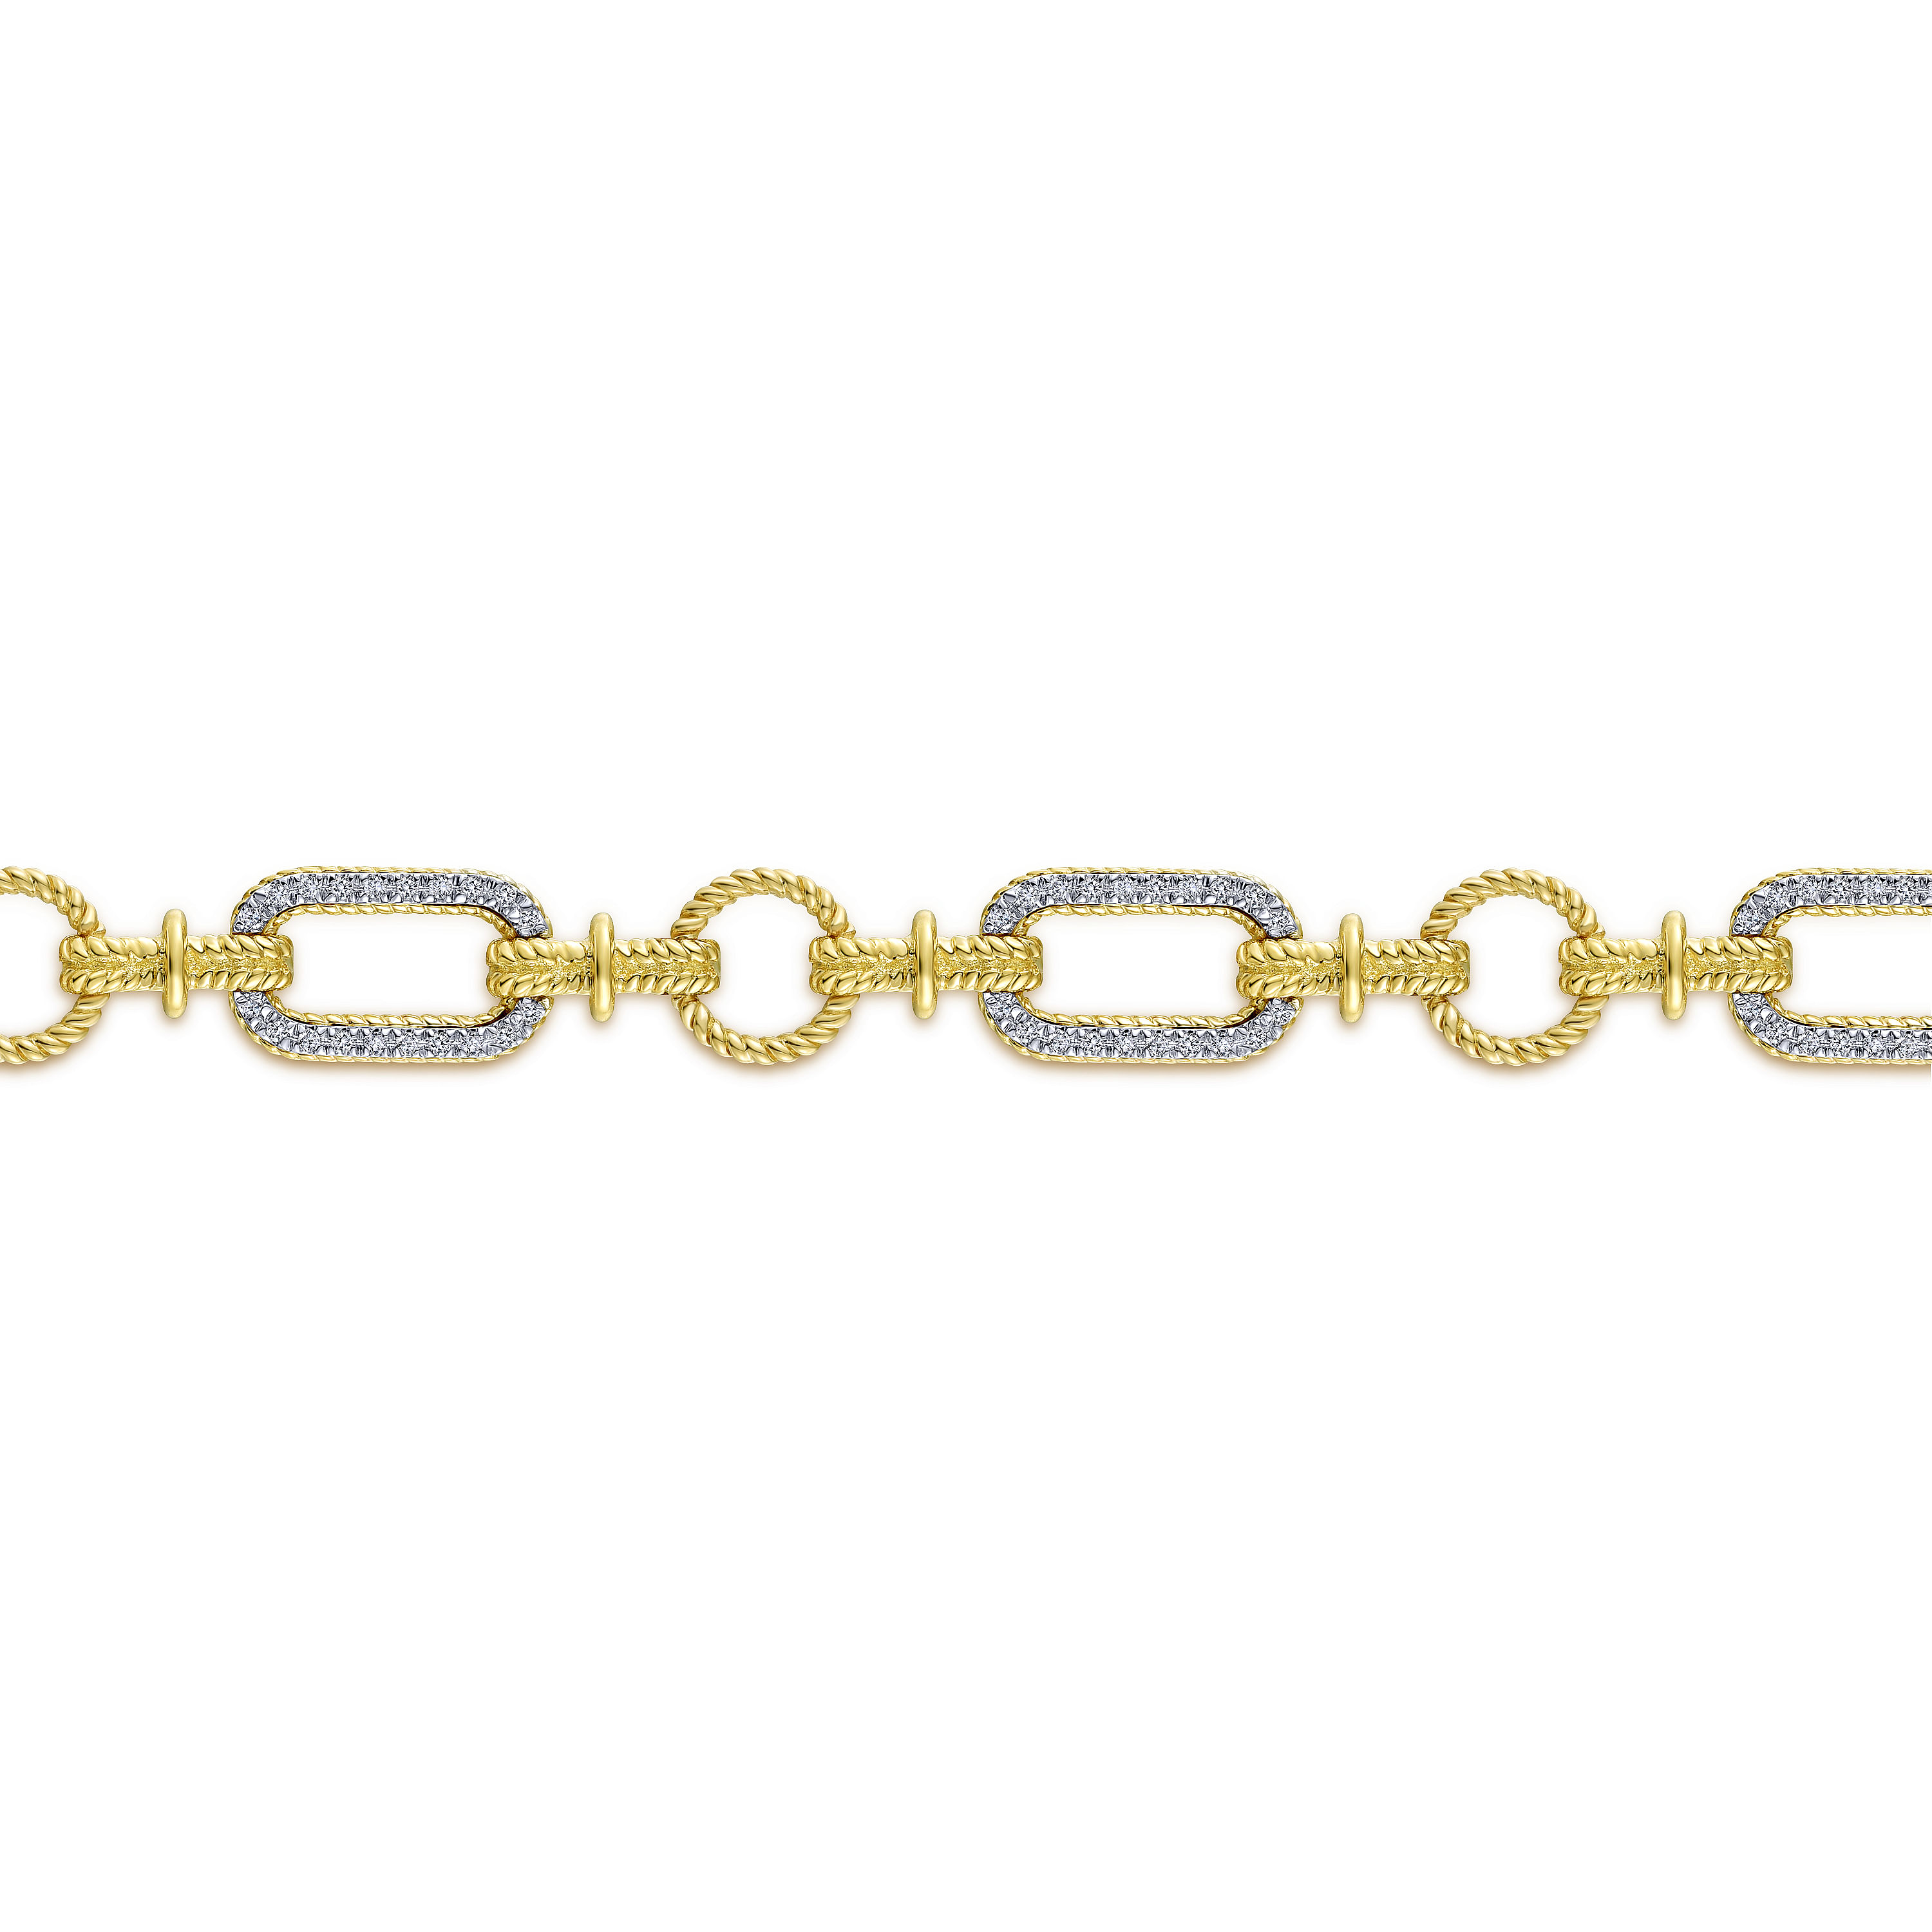 14K Yellow and White Gold Diamond Bracelet with Alternating Links